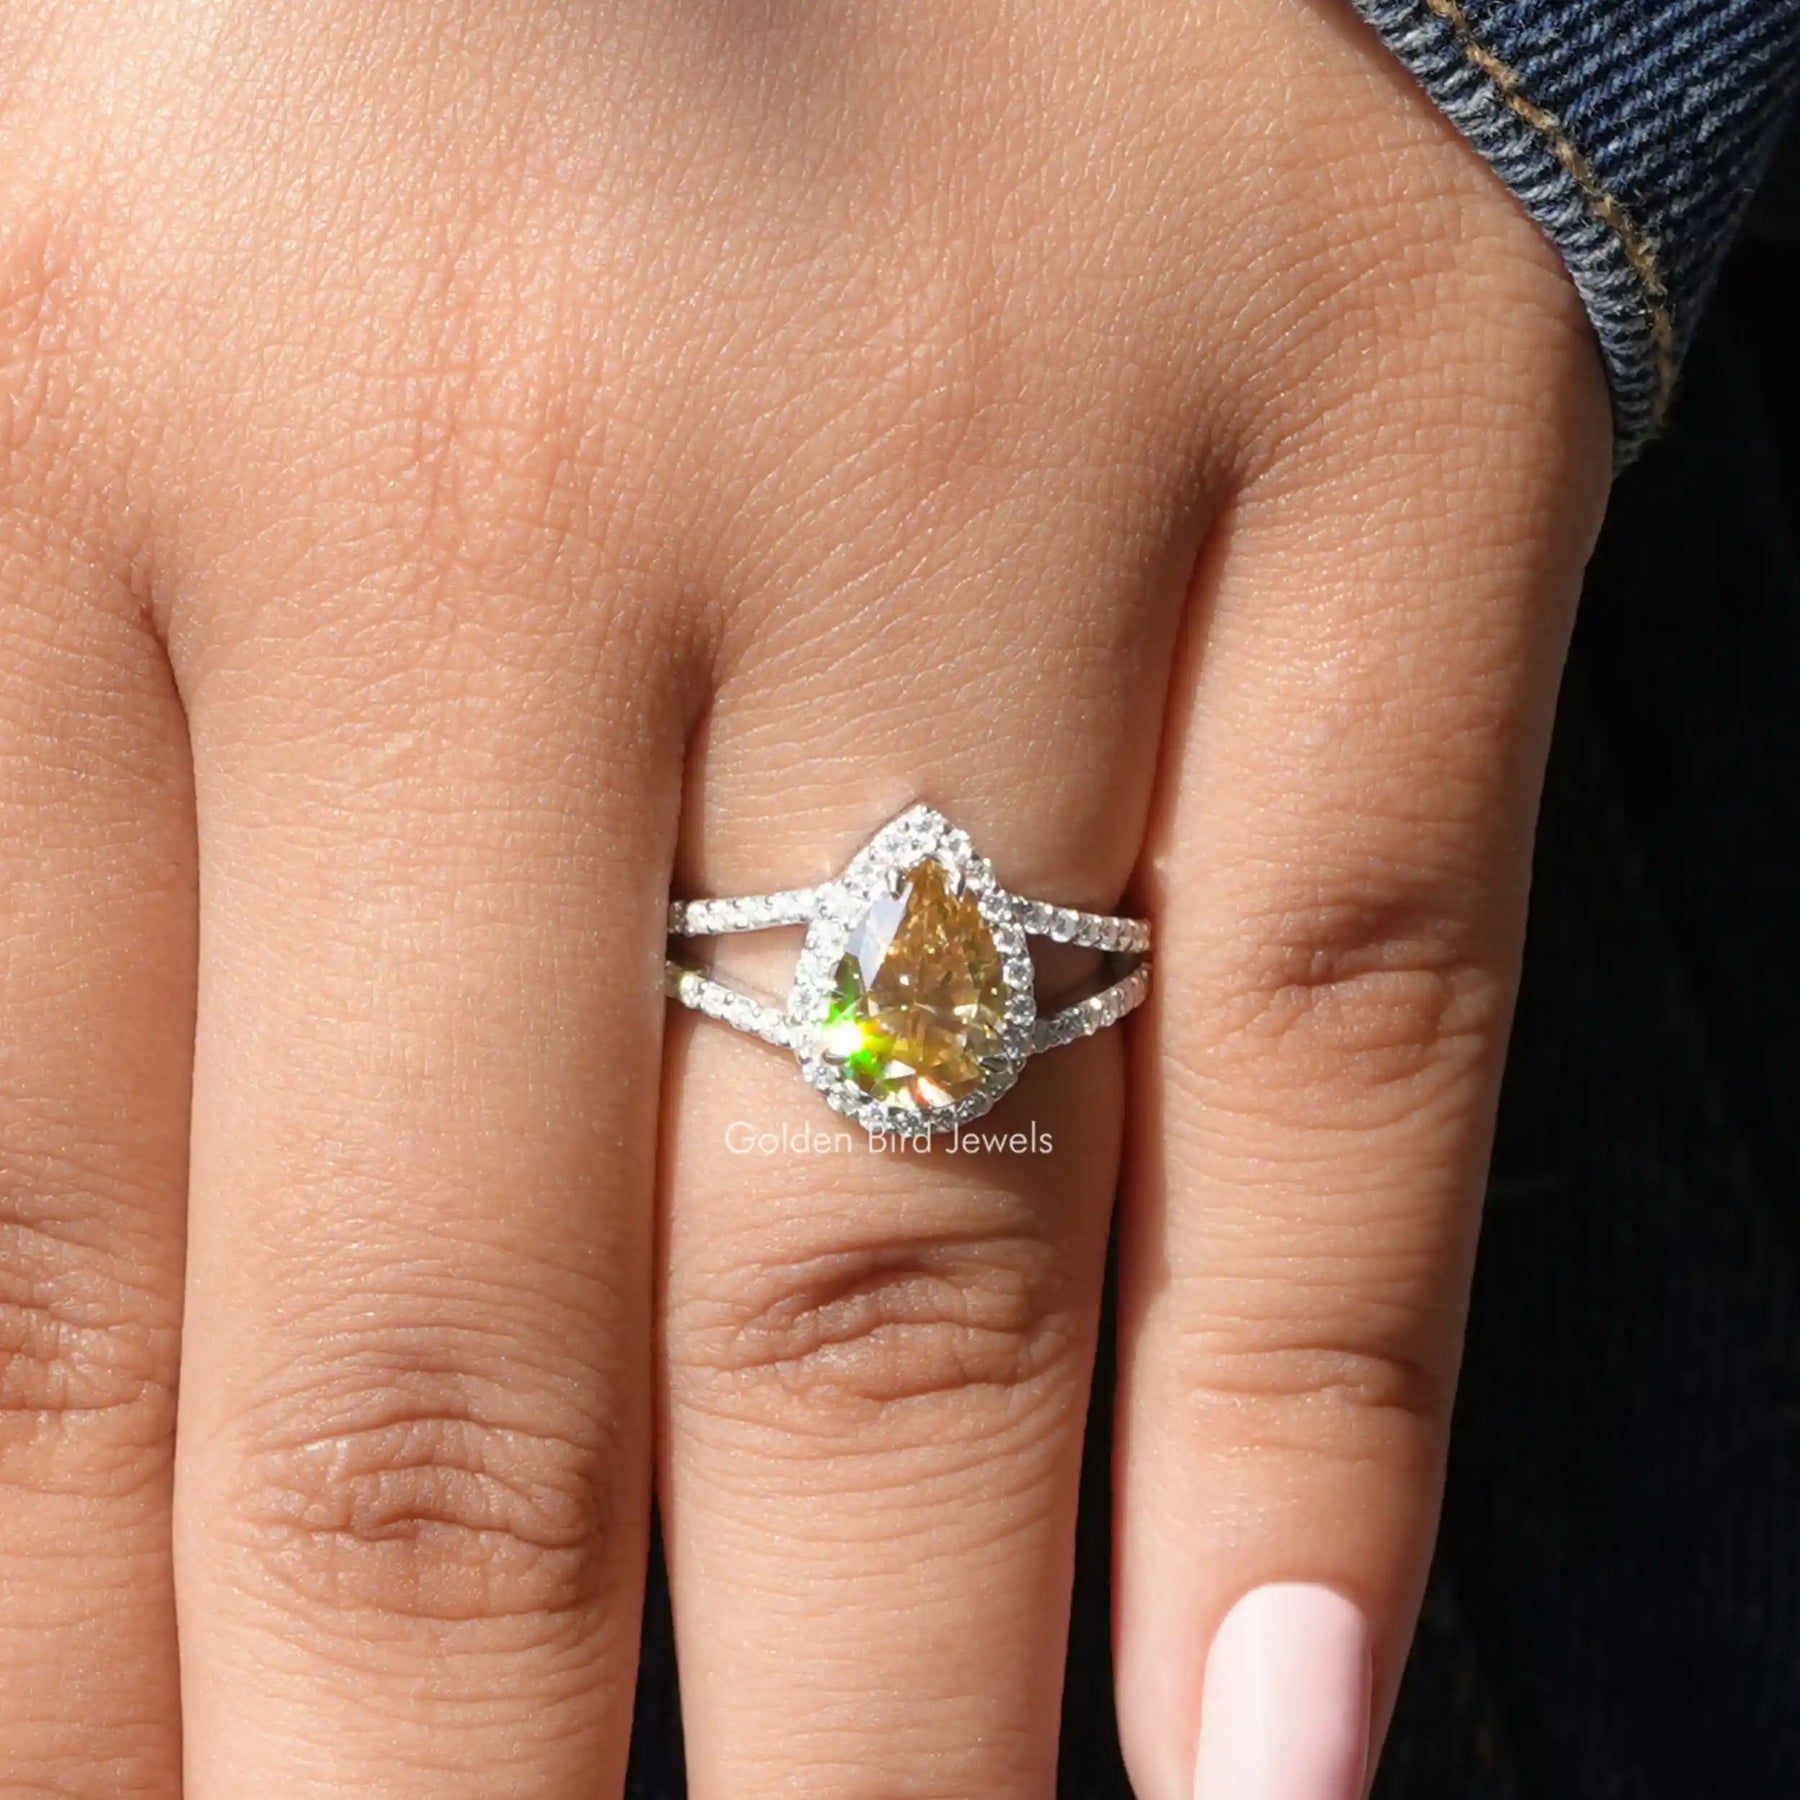 [Pear shaped moissanite ring made of round cut stones]-[Golden Bird Jewels]